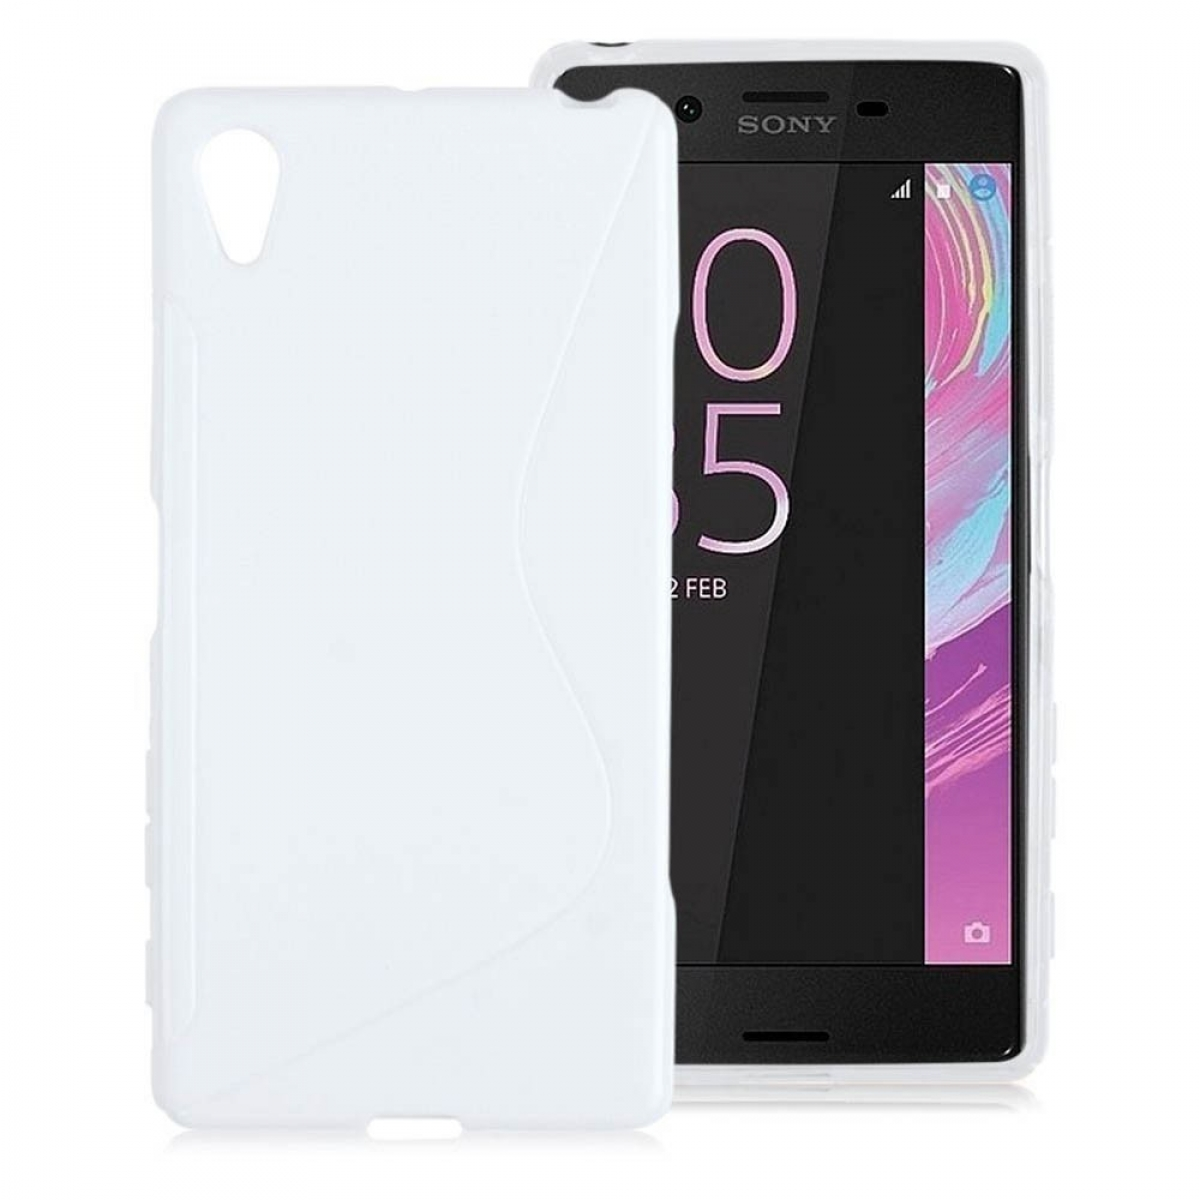 Xperia Weiß, Multicolor Backcover, - X S-Line CASEONLINE Sony, Performance,